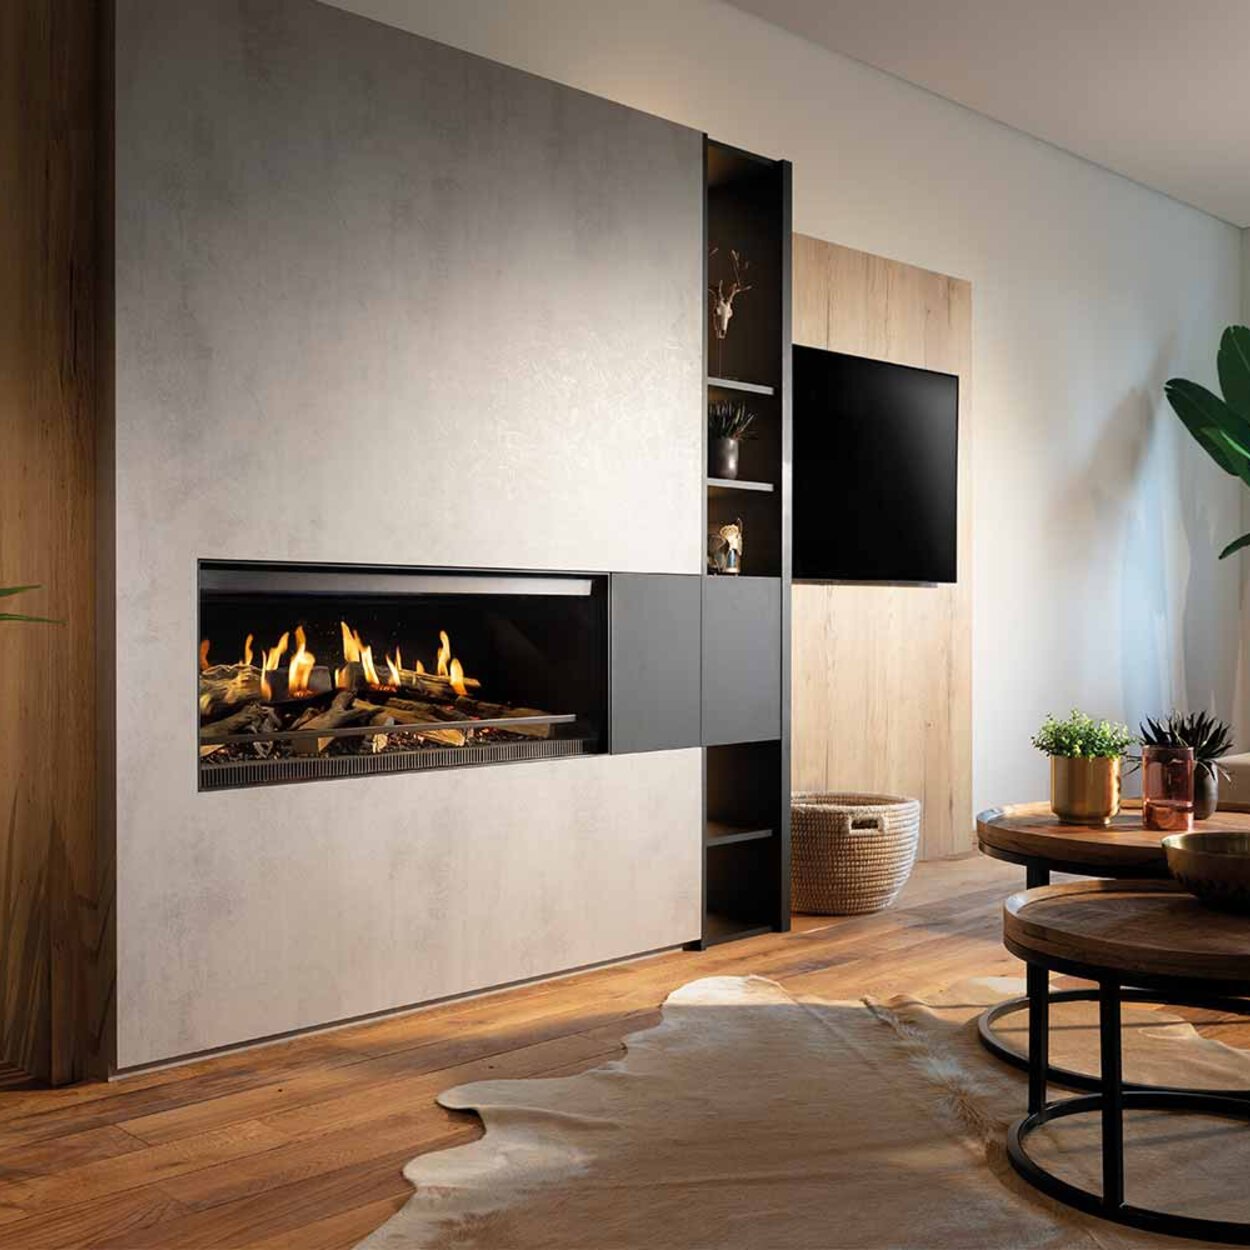 The E-One 100 electric fireplace in the front of a modern living room with plants built into a concrete wall.